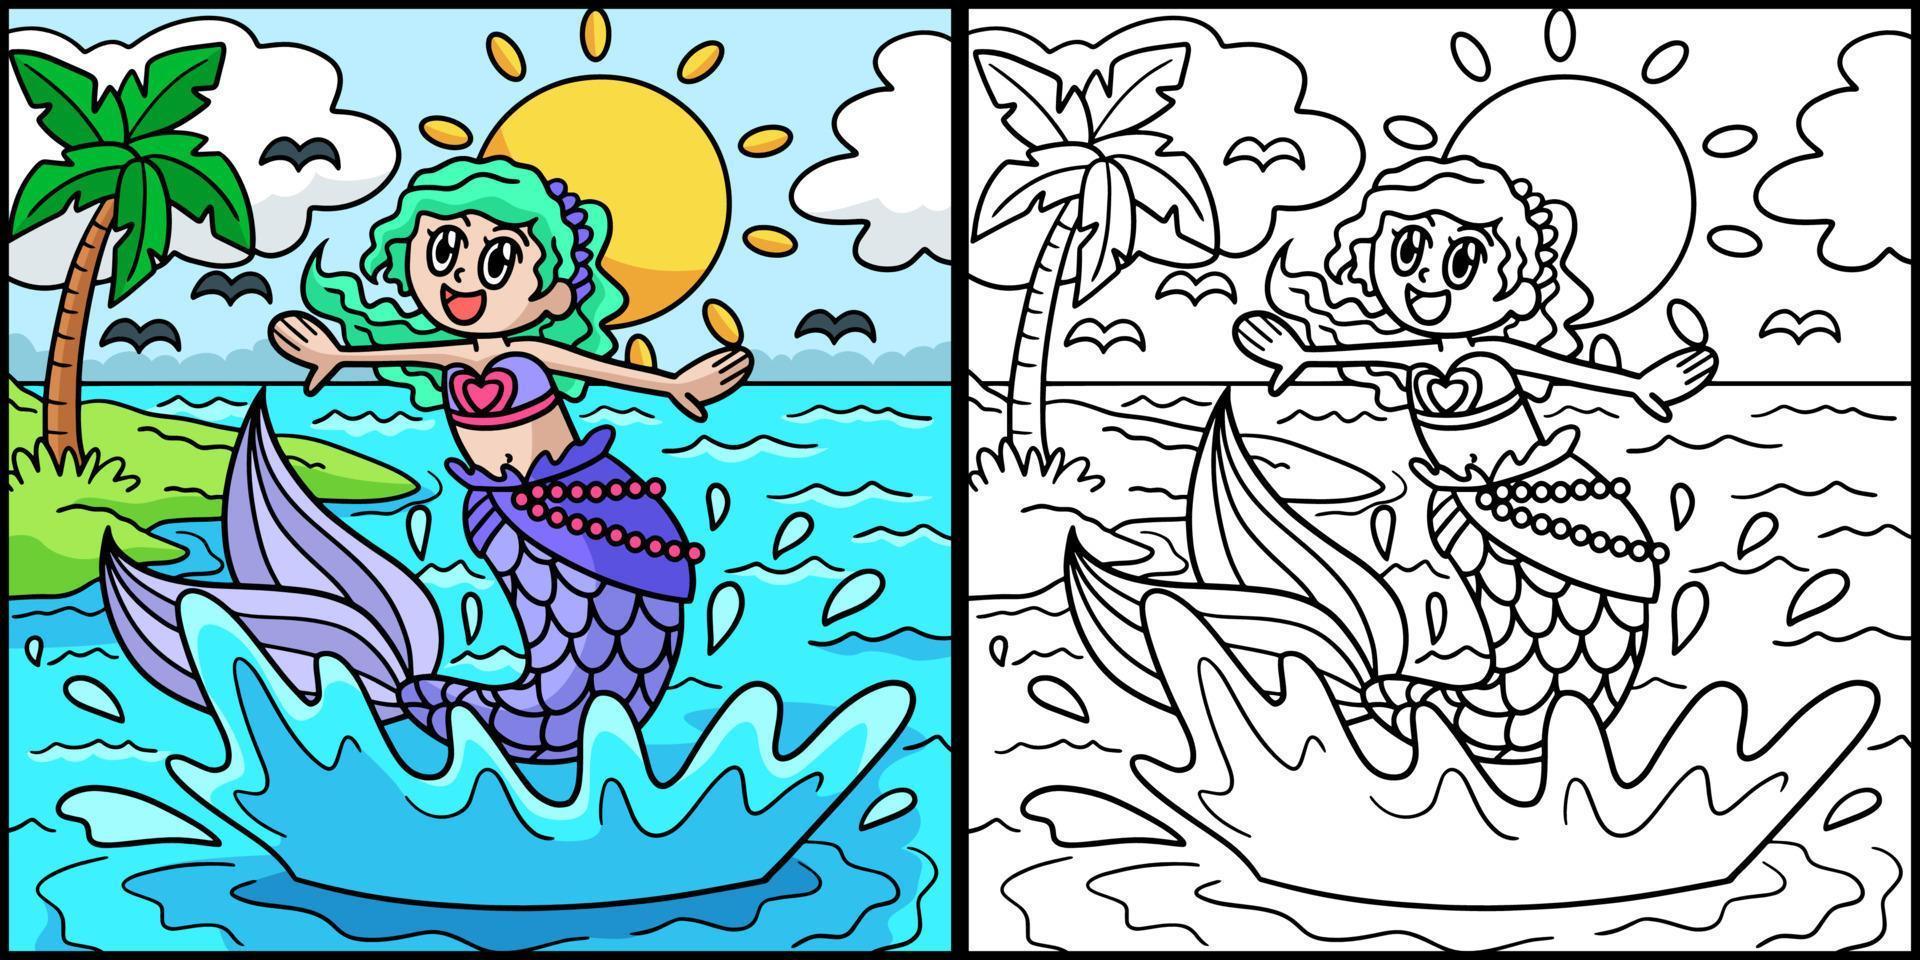 Jumping Mermaid Coloring Page Colored Illustration vector